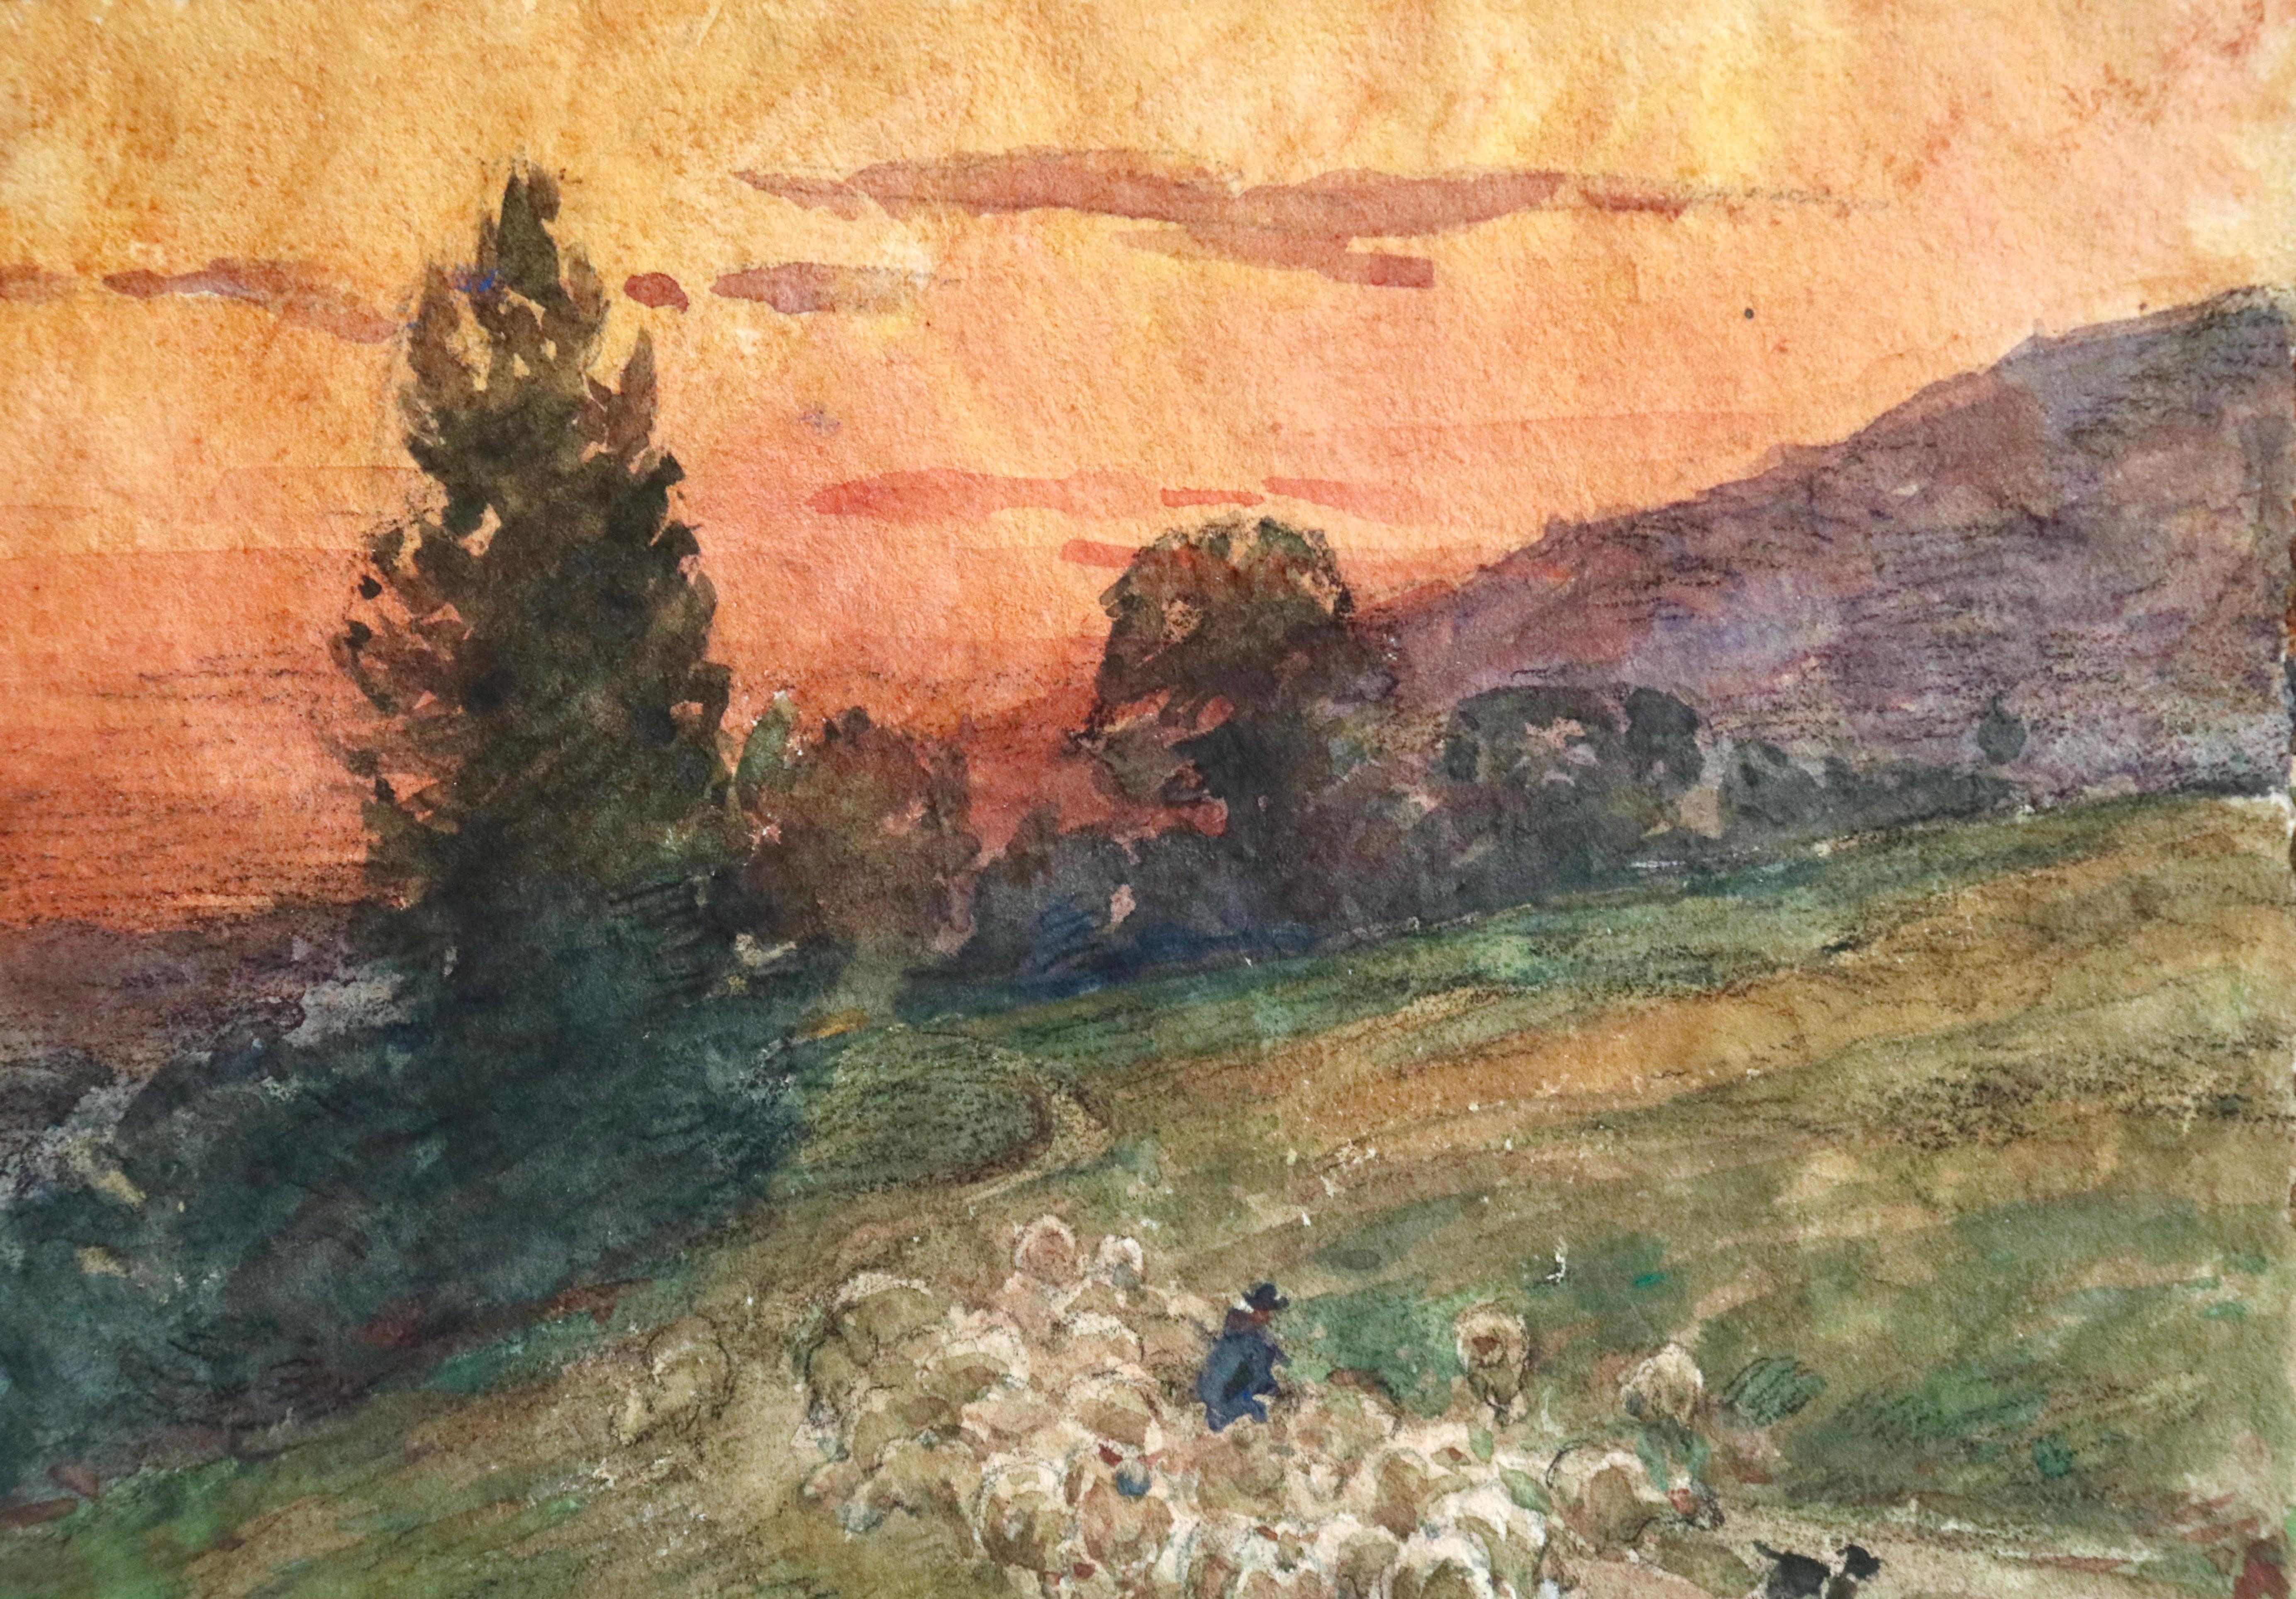 Droving Sheep at Sunset - 19th Century Watercolor, Flock in Landscape by H Duhem - Brown Animal Art by Henri Duhem